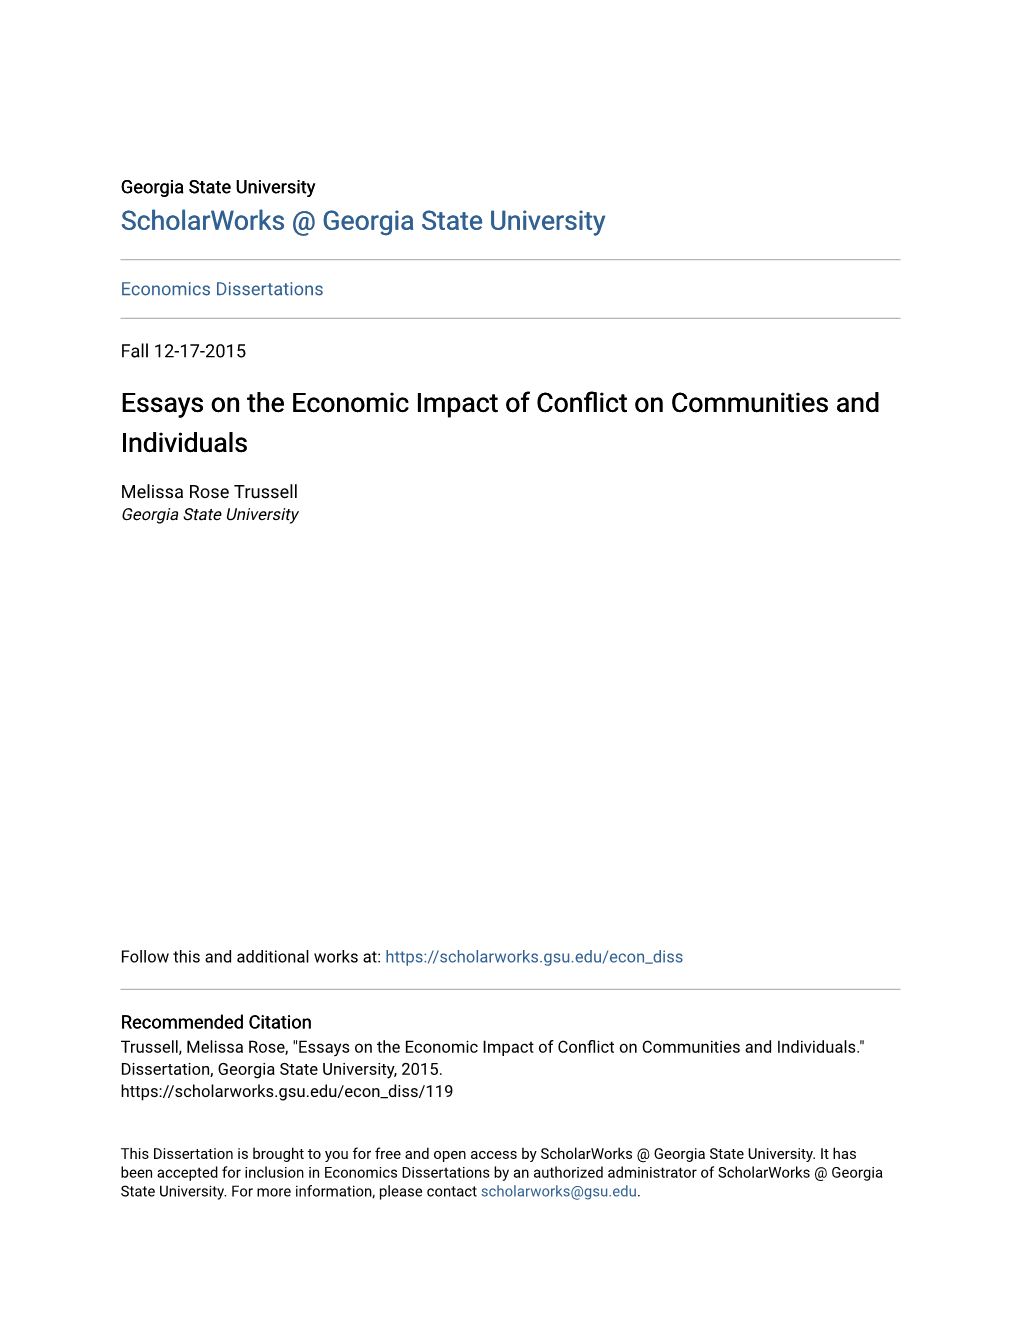 Essays on the Economic Impact of Conflict on Communities and Individuals